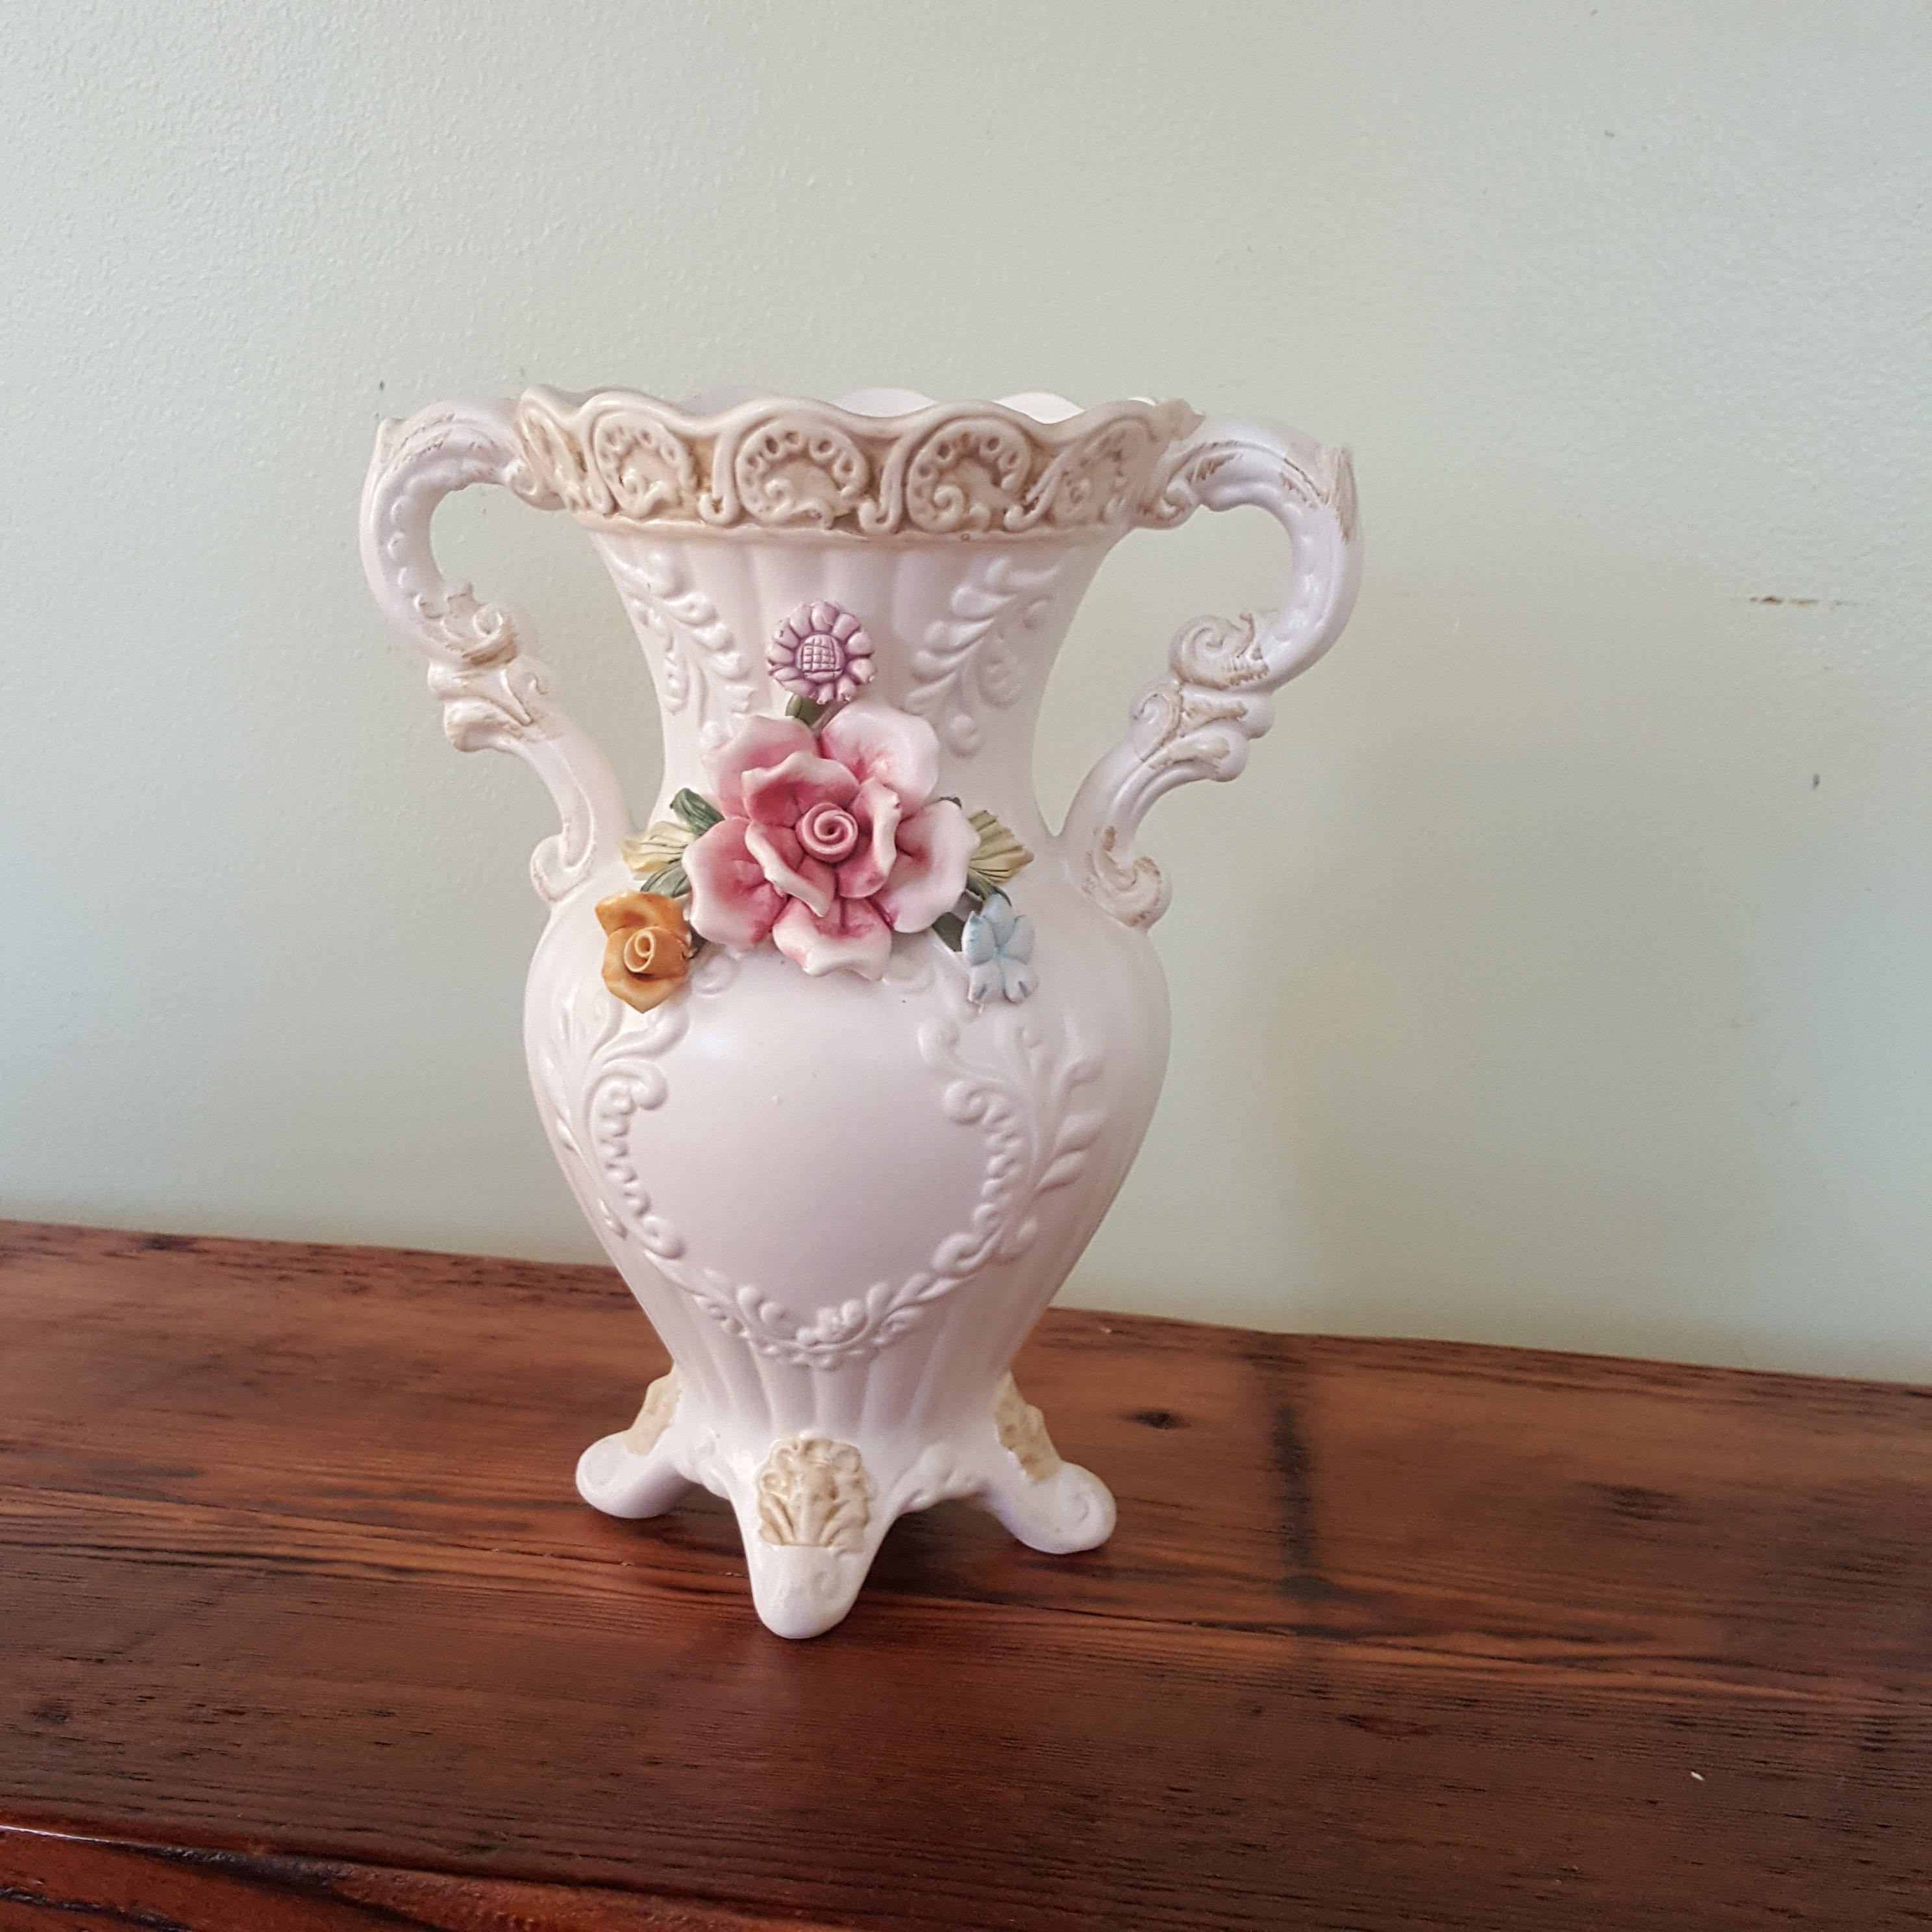 20 Perfect norleans Vase Made In Italy 2024 free download norleans vase made in italy of vase vintage porcelain flower capodimonte made in italy white with vase vintage porcelain flower capodimonte made in italy white beige pink colors norleans